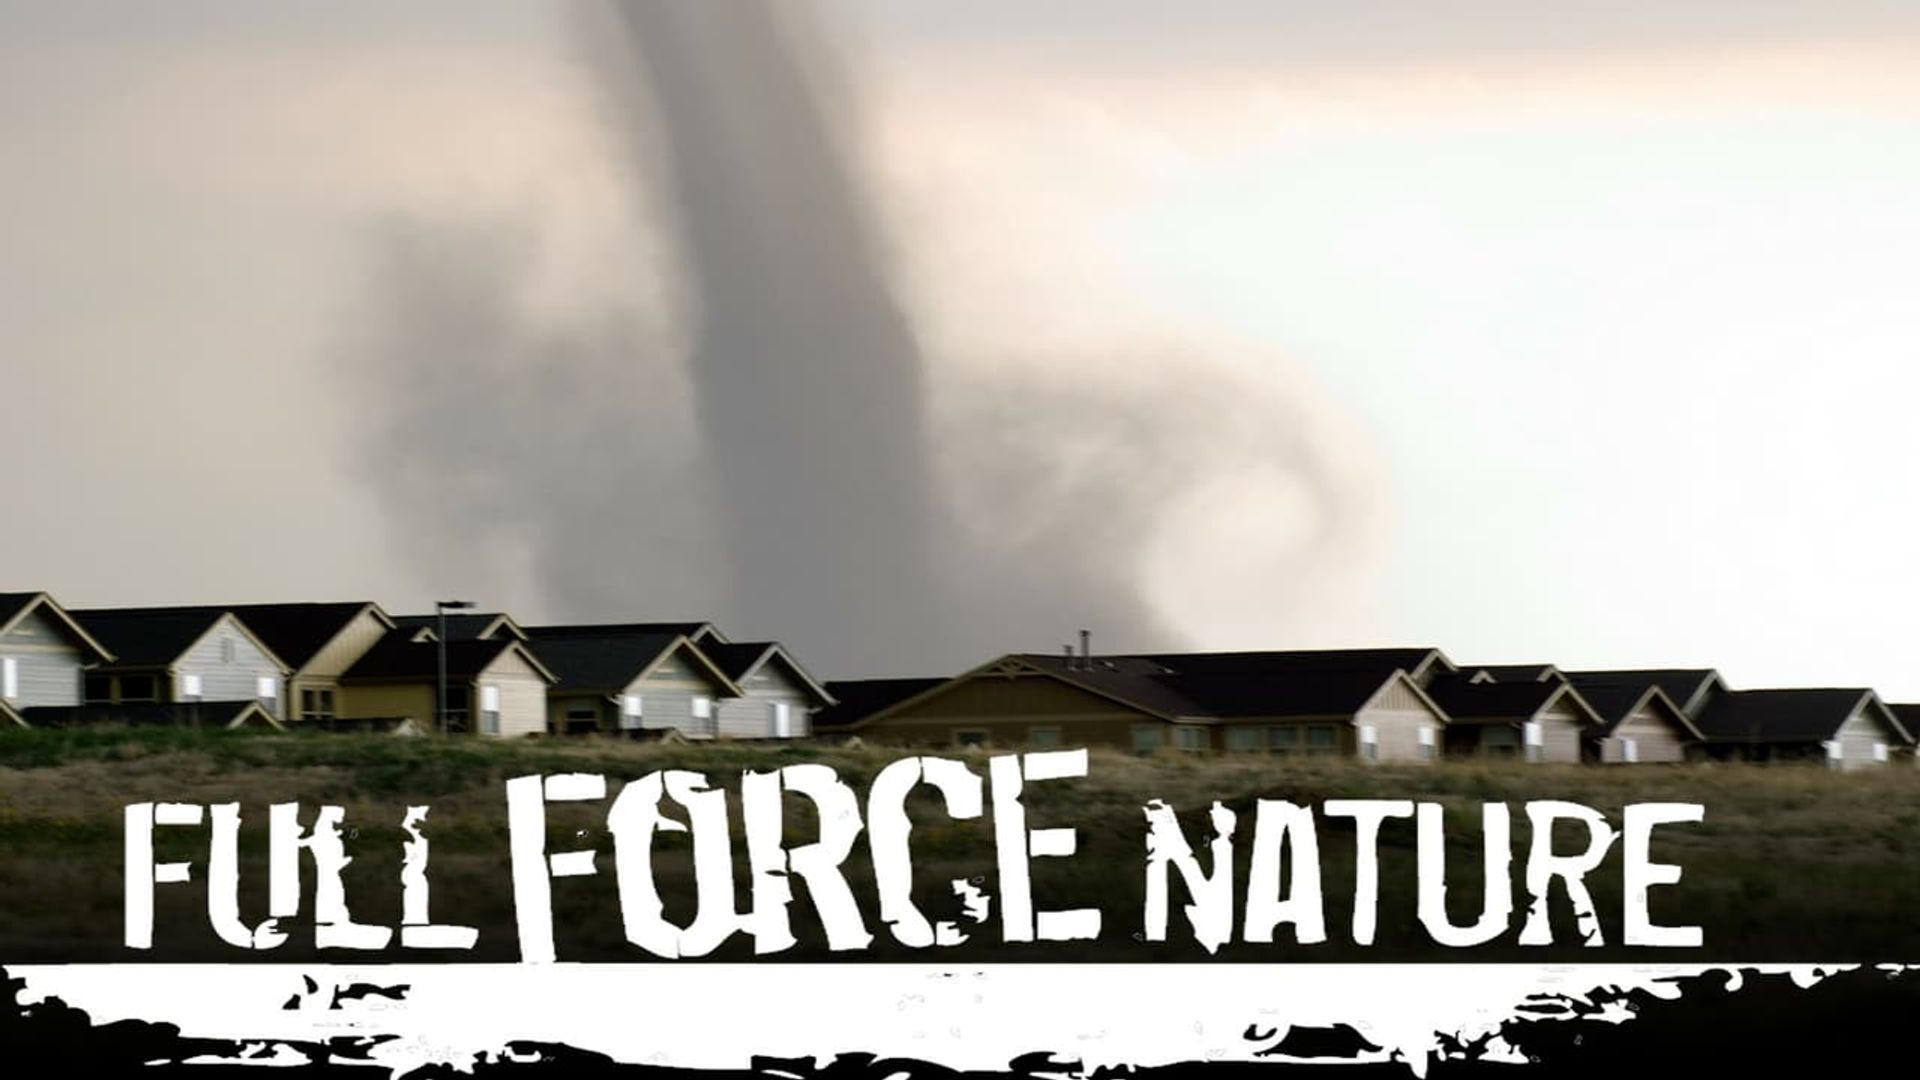 Full Force Nature background